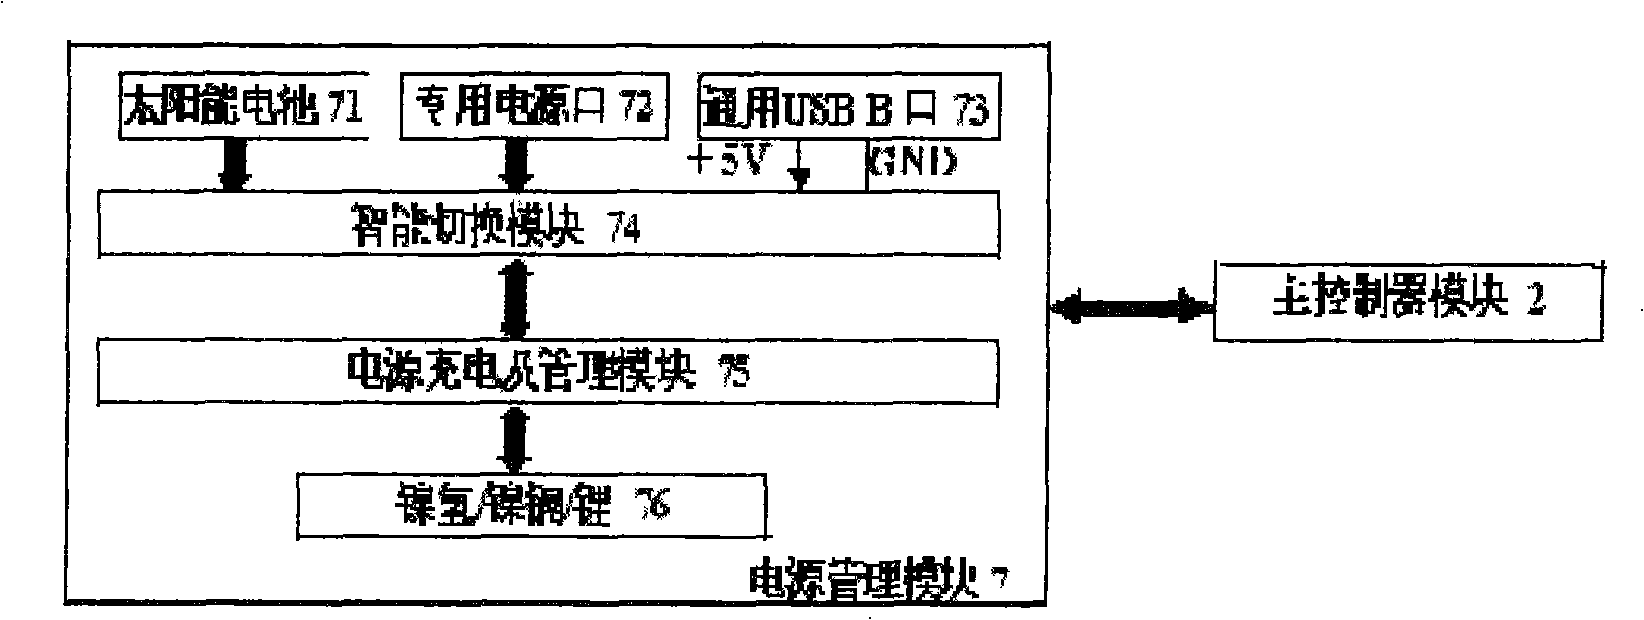 Apparatus and method for off line data exchange